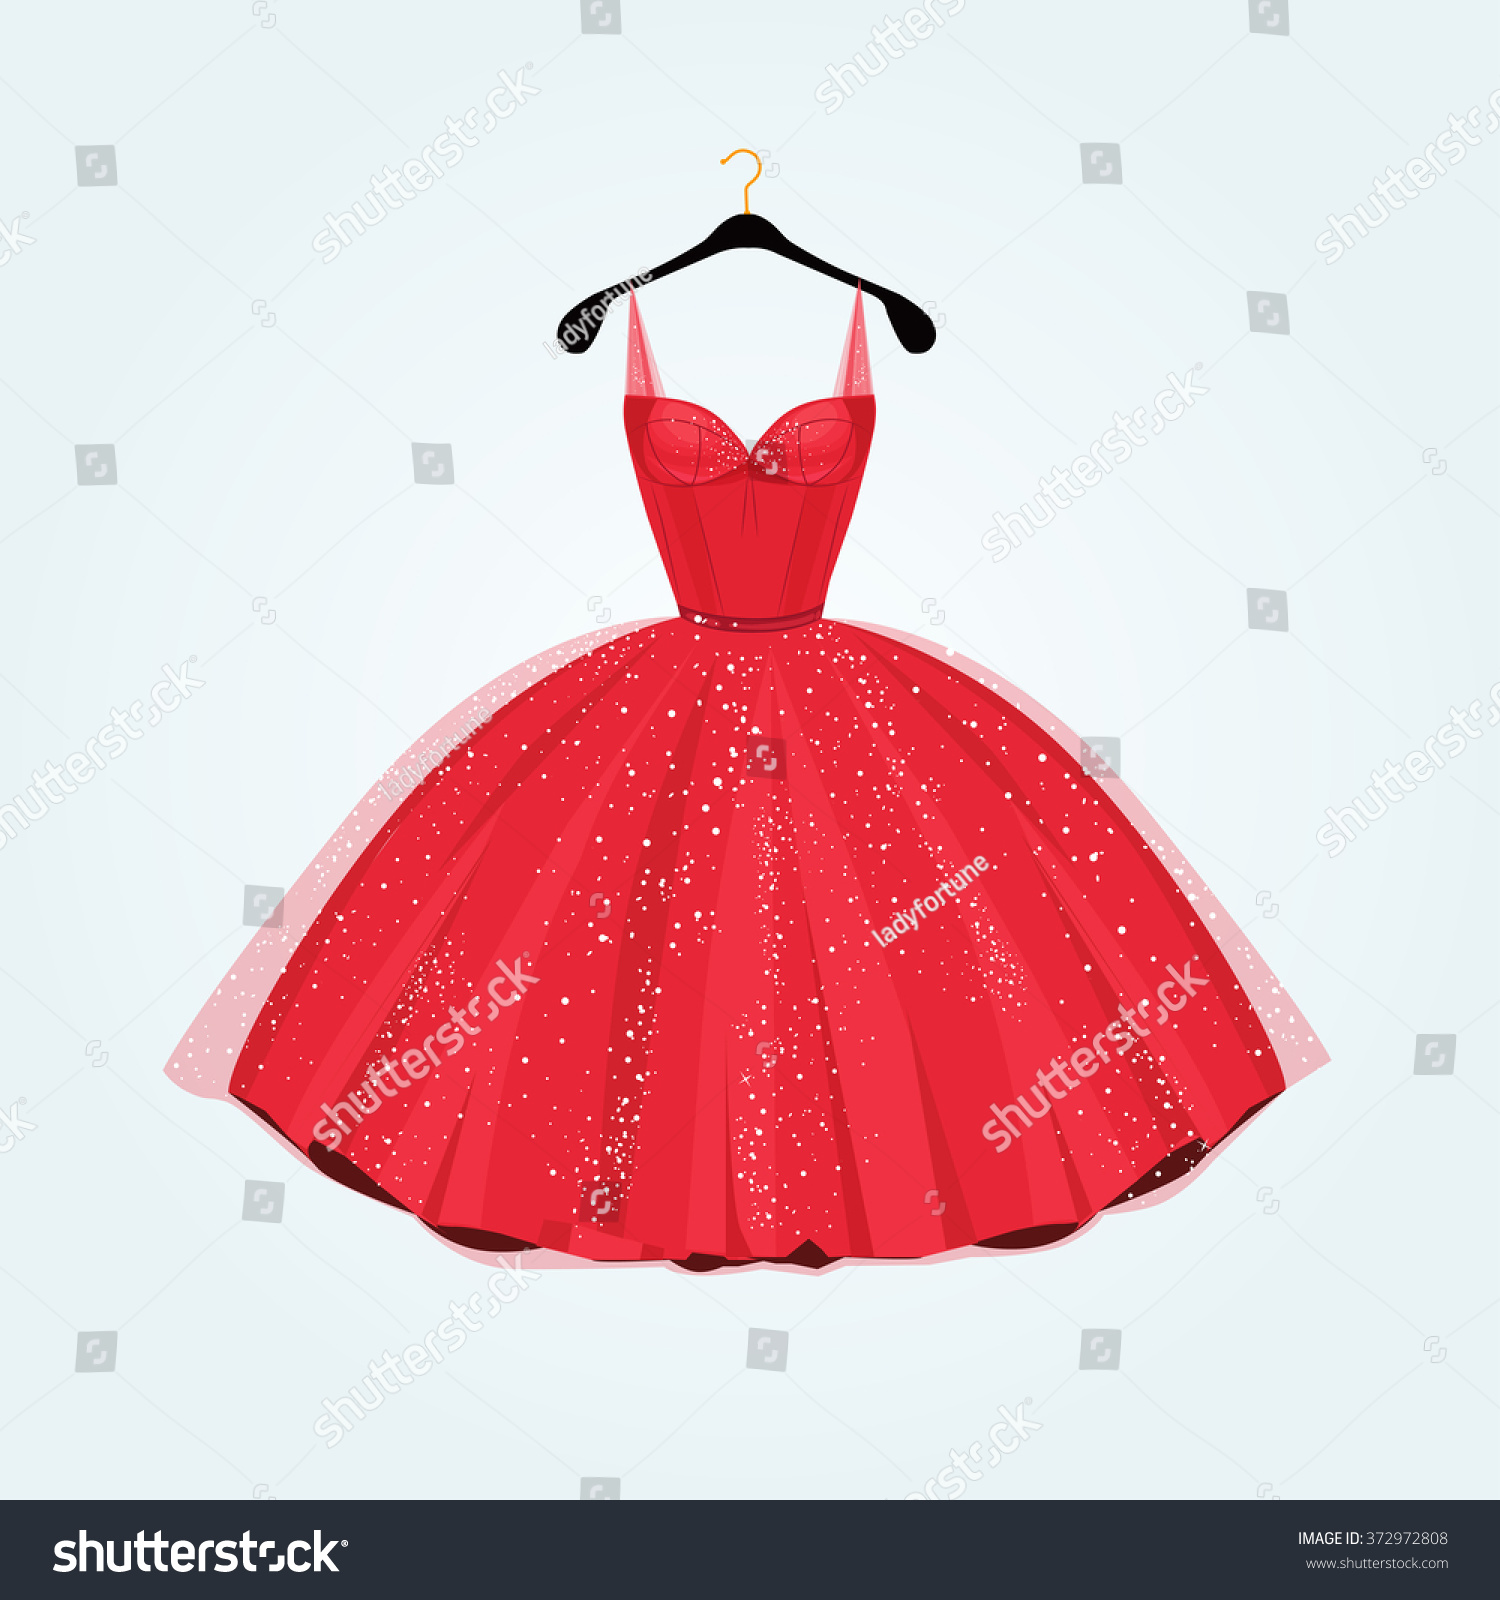 SVG of Party dress. Red vintage style party dress.Vector illustration svg